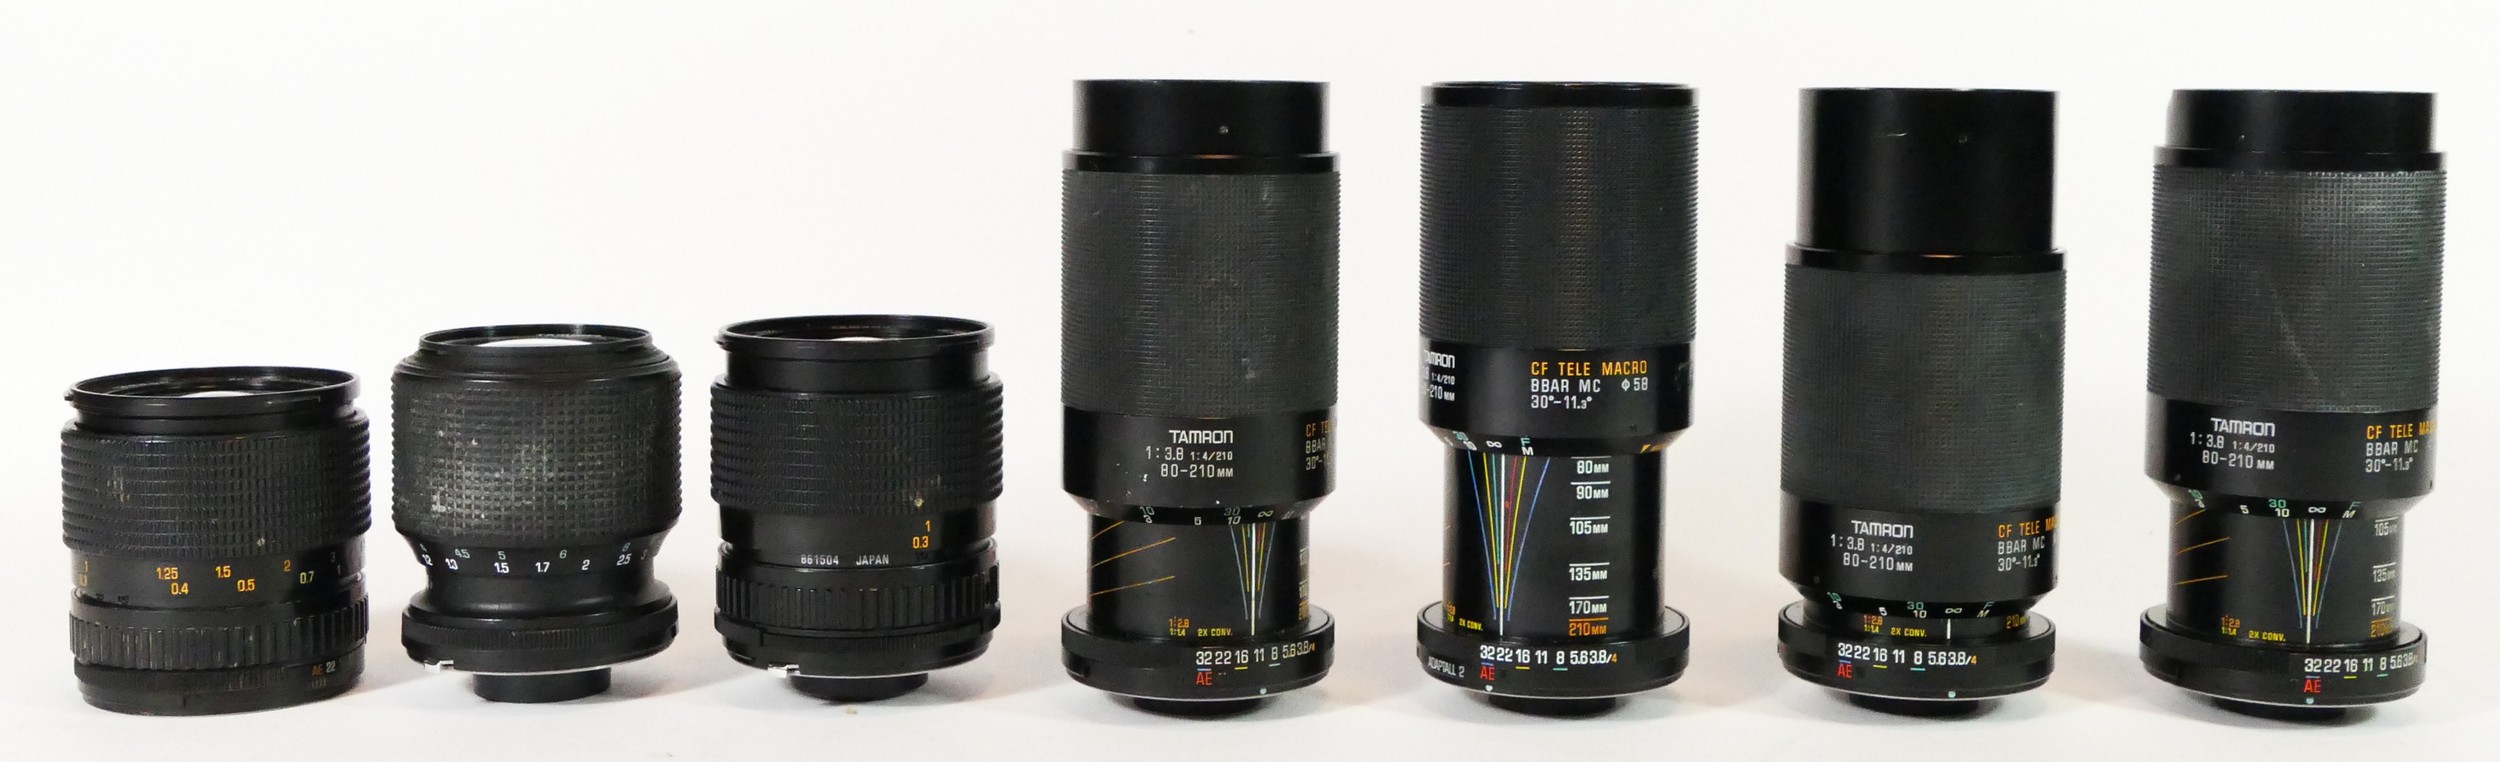 Seven Tamron lenses, to include a 28mm-70mm (x2), a 80mm-120mm (x4) and a 70mm-210mm